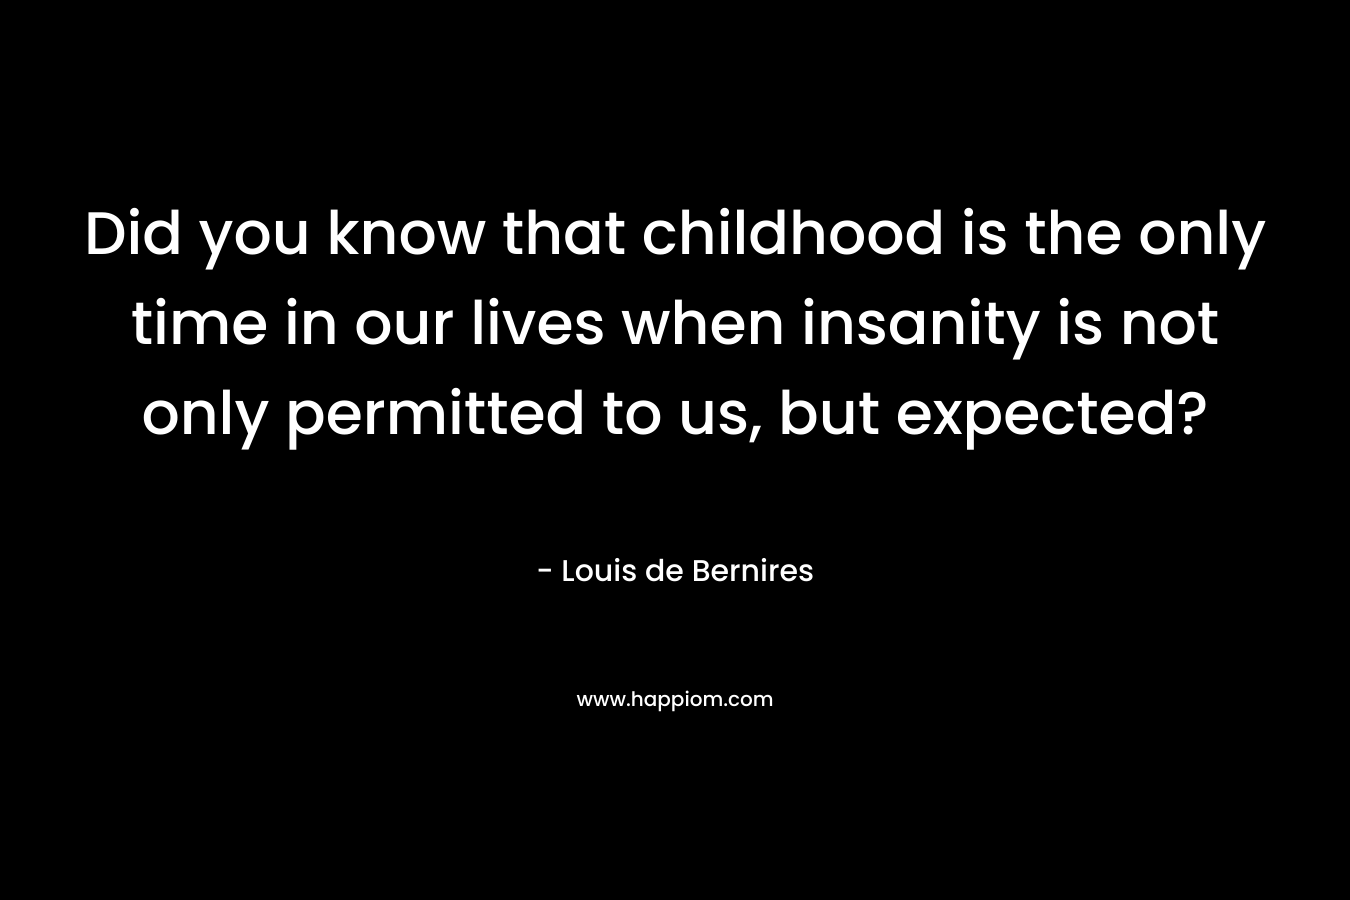 Did you know that childhood is the only time in our lives when insanity is not only permitted to us, but expected? – Louis de Bernires